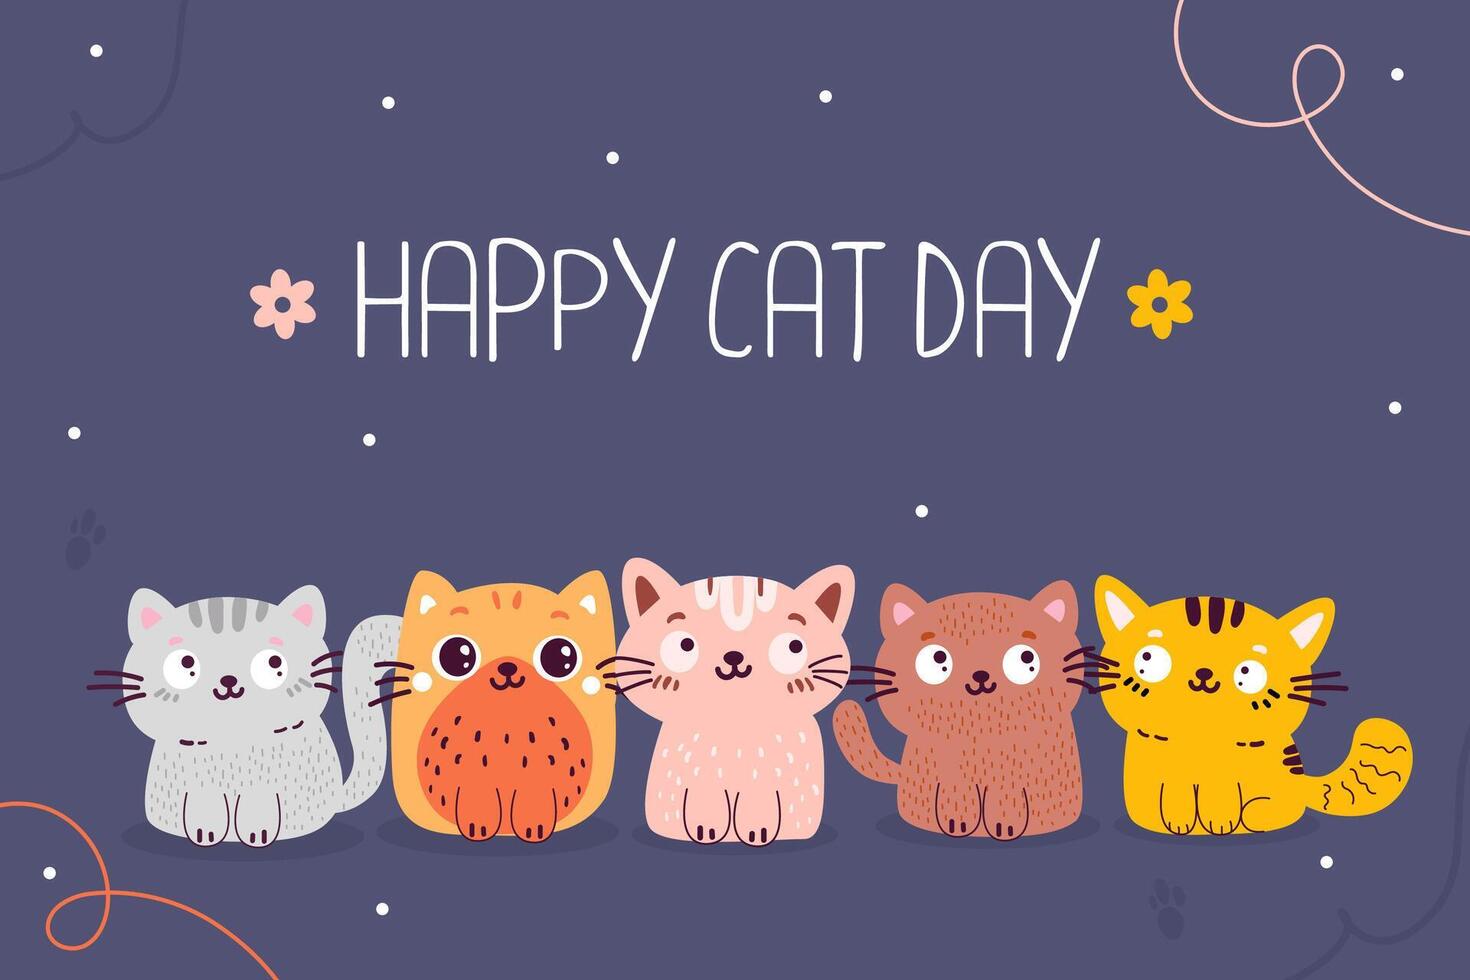 International happy cat day doodle background banner vector